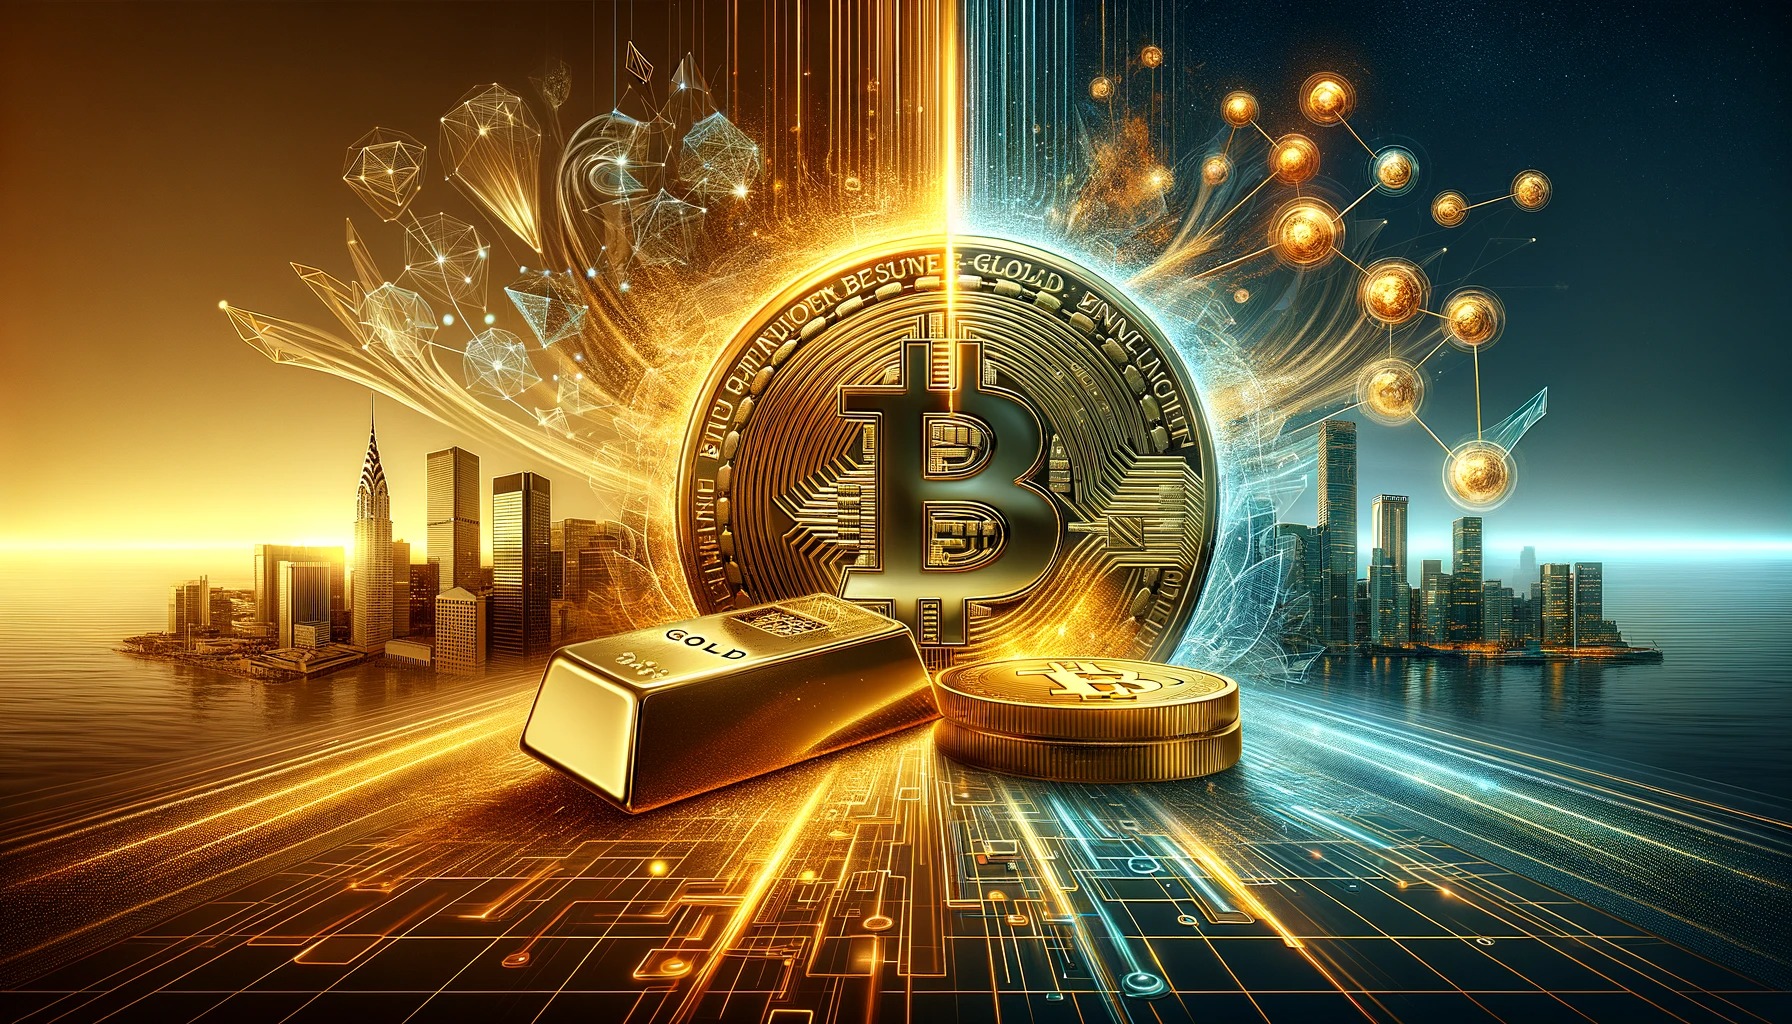 shimmering gold bar and a visually striking Bitcoin coin, designed with intricate digital patterns